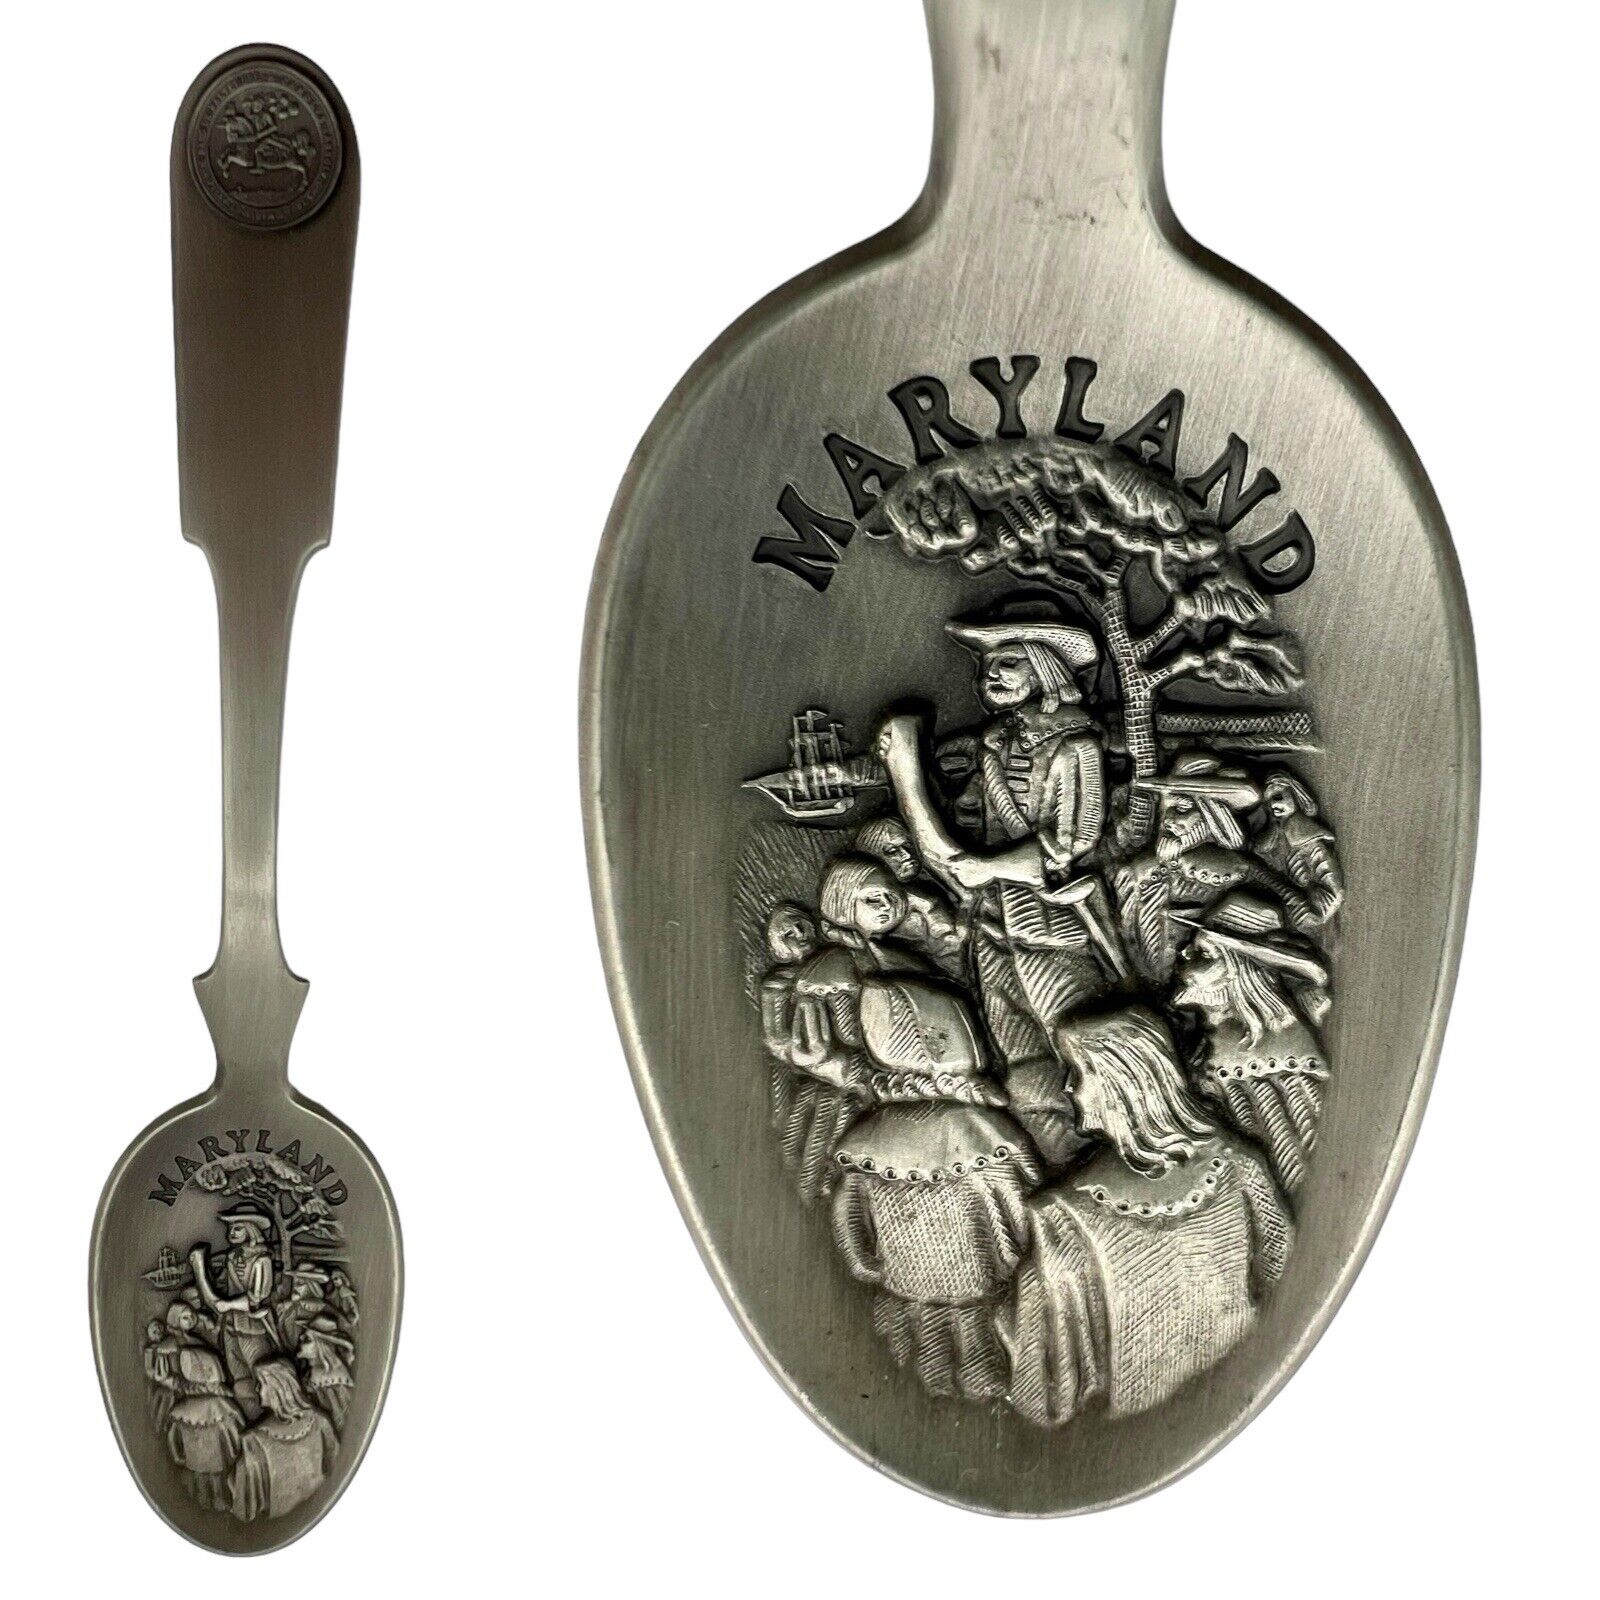 VTG 1975 Franklin Mint American Colonies Decorative Spoon MARYLAND Pewter